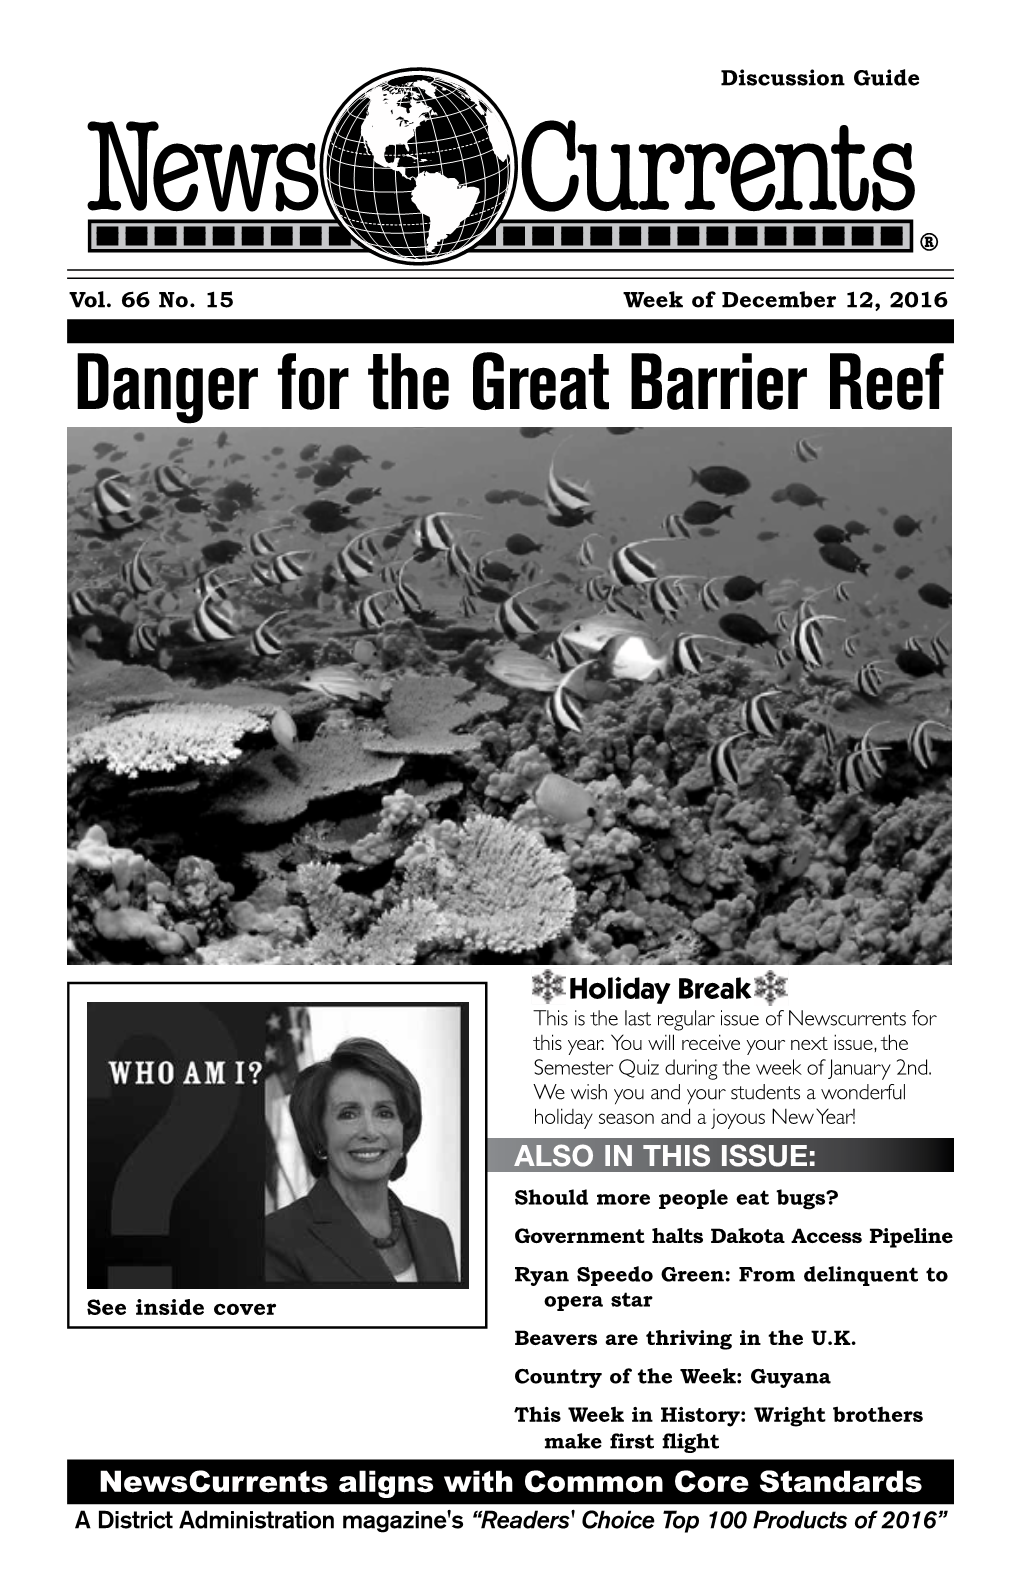 Danger for the Great Barrier Reef